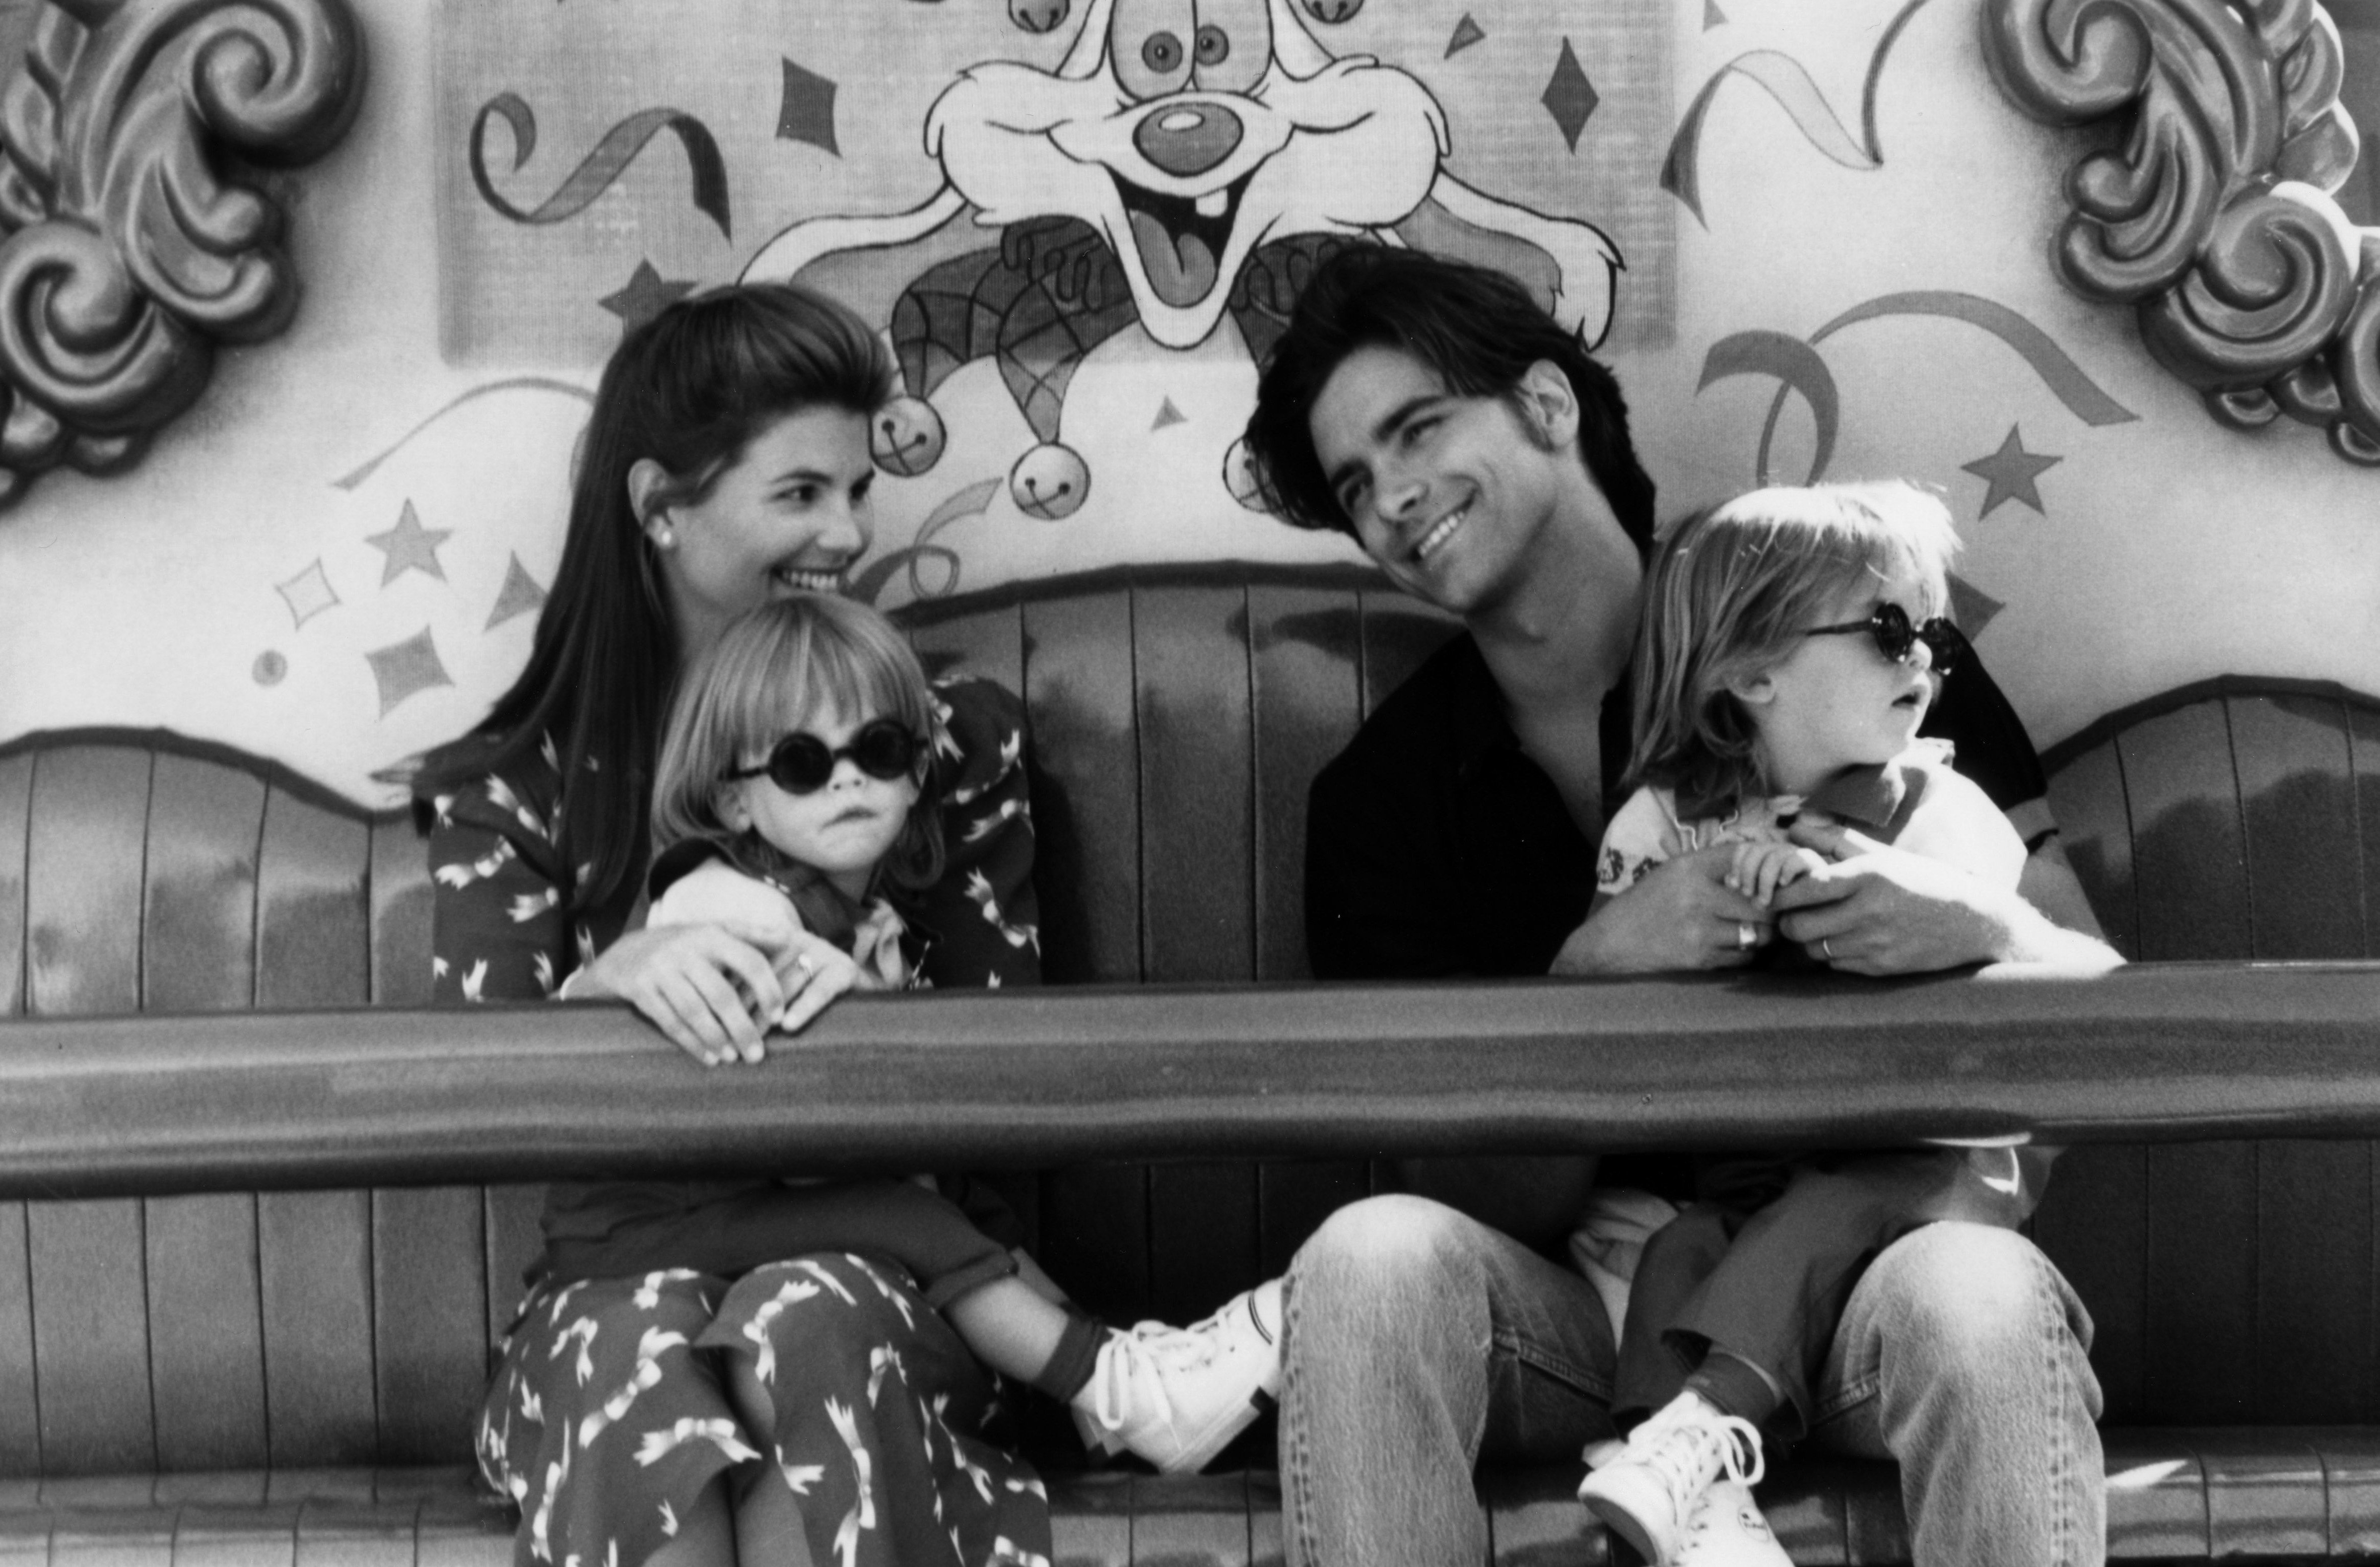 Still from the 'Full House' episode titled 'The House Meets The Mouse,' featuring John Stamos and other 'Full House' cast members